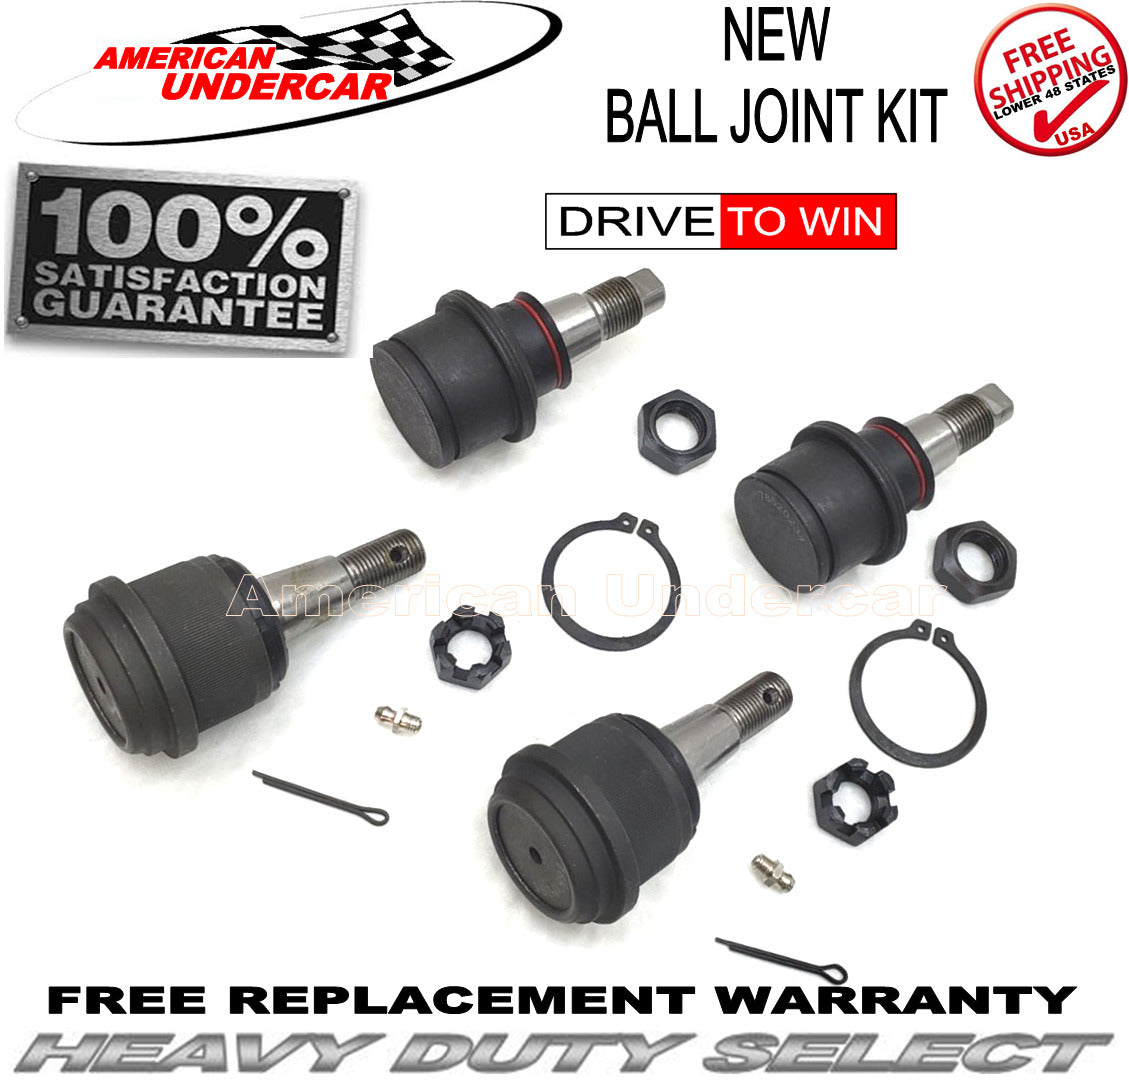 HD Upper and Lower Ball Joint Suspension Kit for 2000-2002 Dodge Ram 2500, 3500 4x4